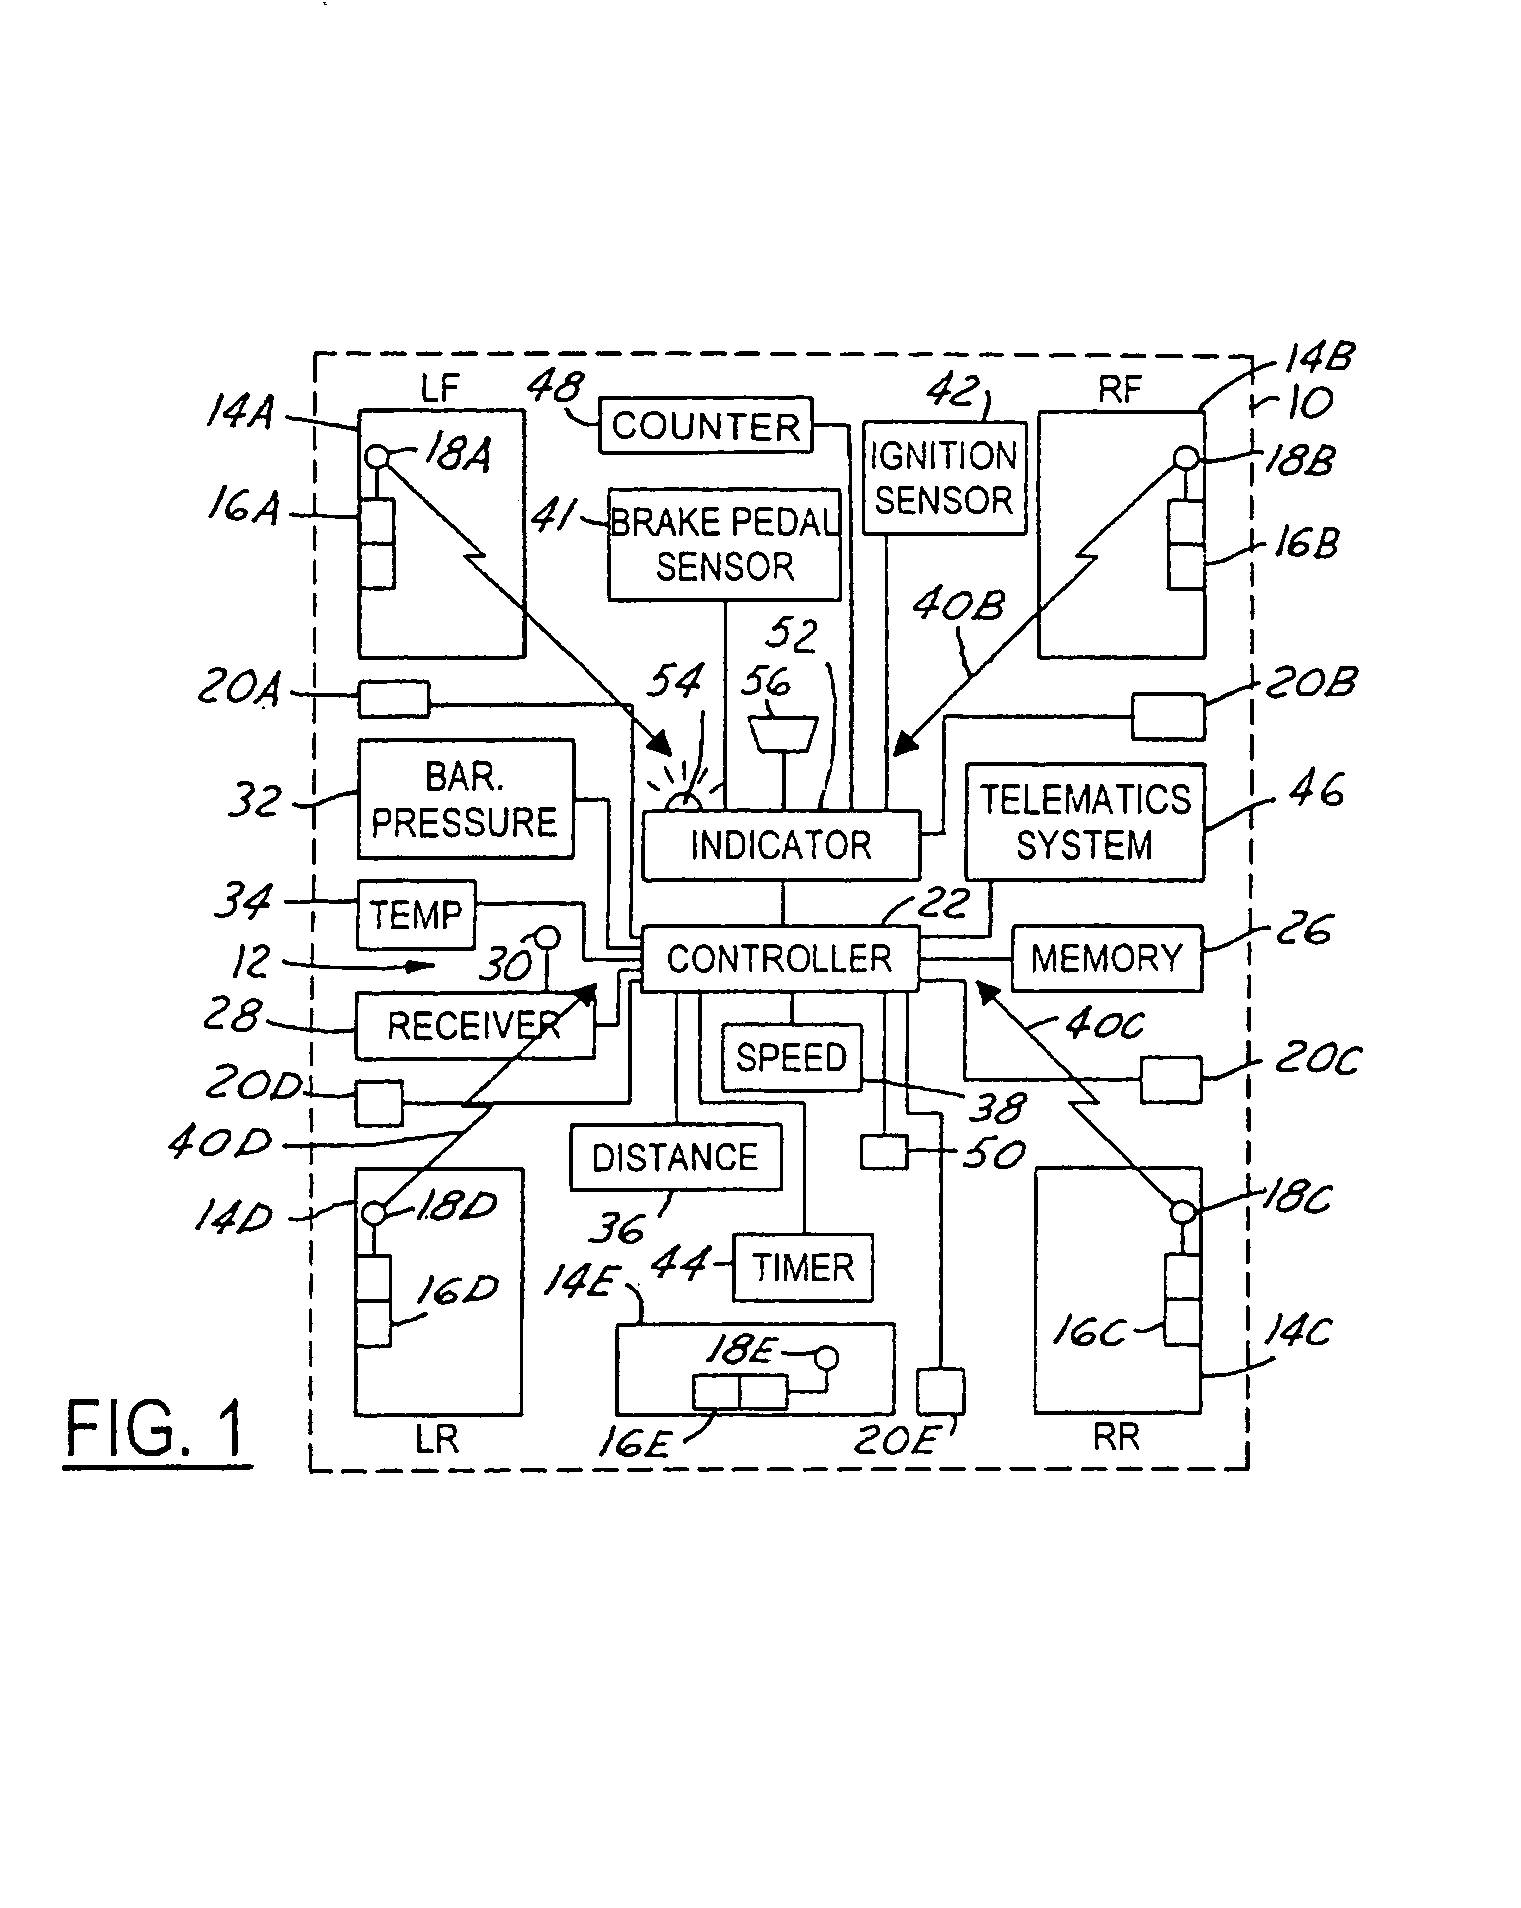 Method and system for mitigating false alarms in a tire pressure monitoring system for an automotive vehicle